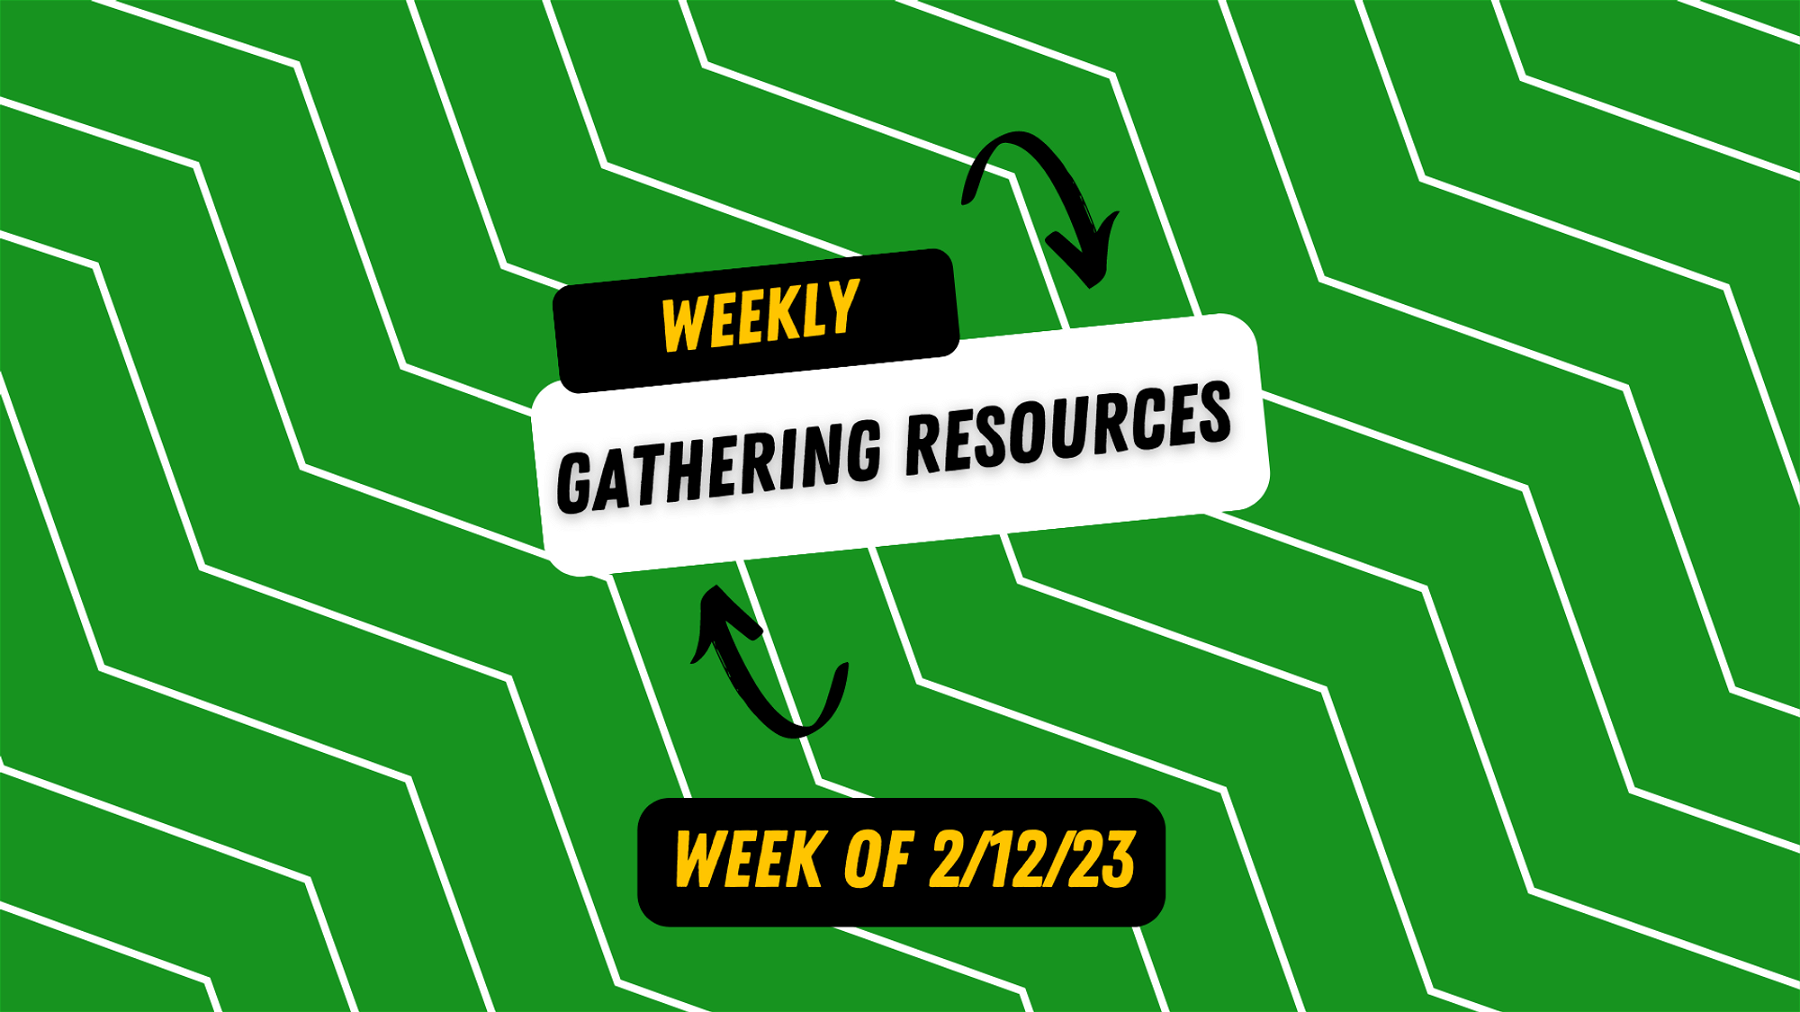 Weekly Gathering Resources for 2/12/23